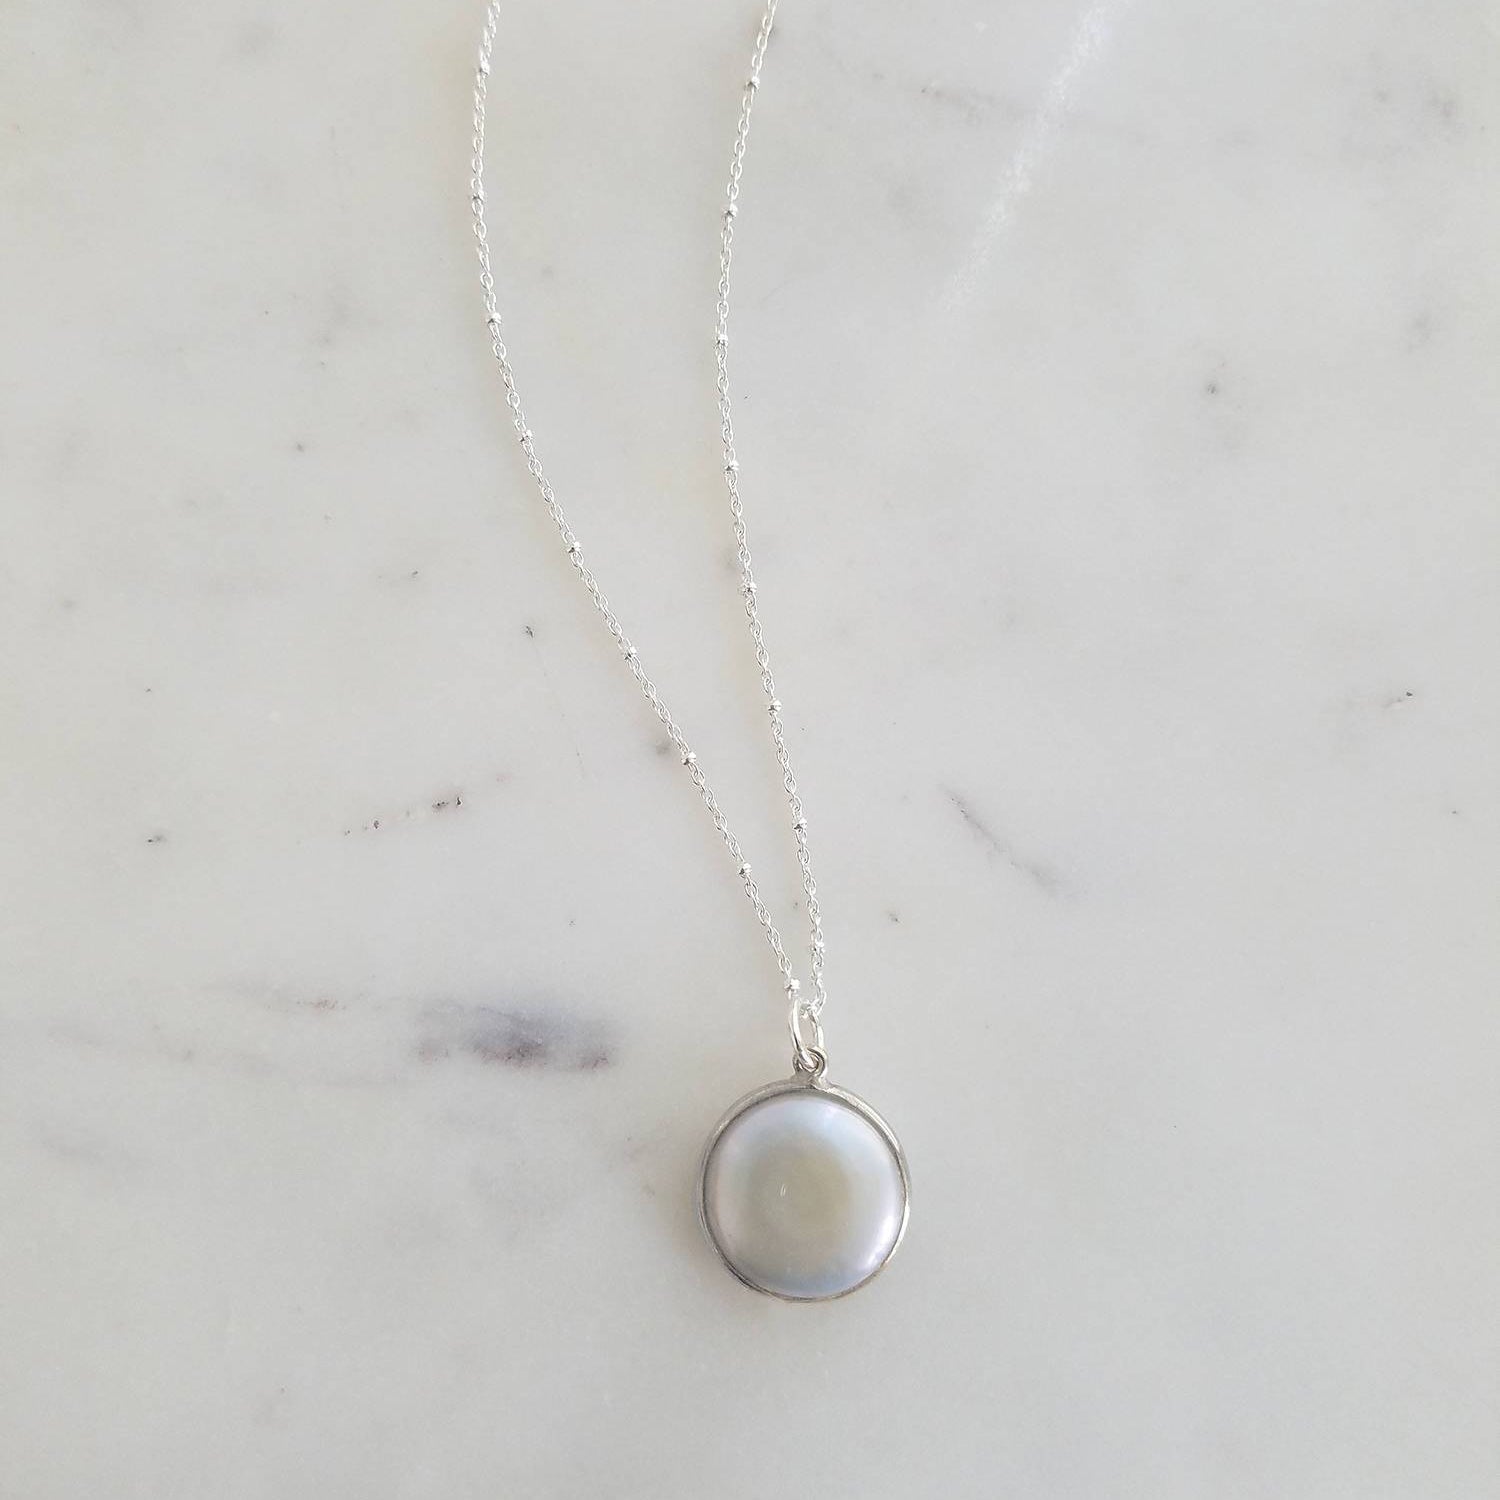 Pearl Necklace - Gemstone Charm Necklace - Round Gemstone Necklace - Bezel Set Necklace - Bridal Jewelry - Bridesmaid Necklace